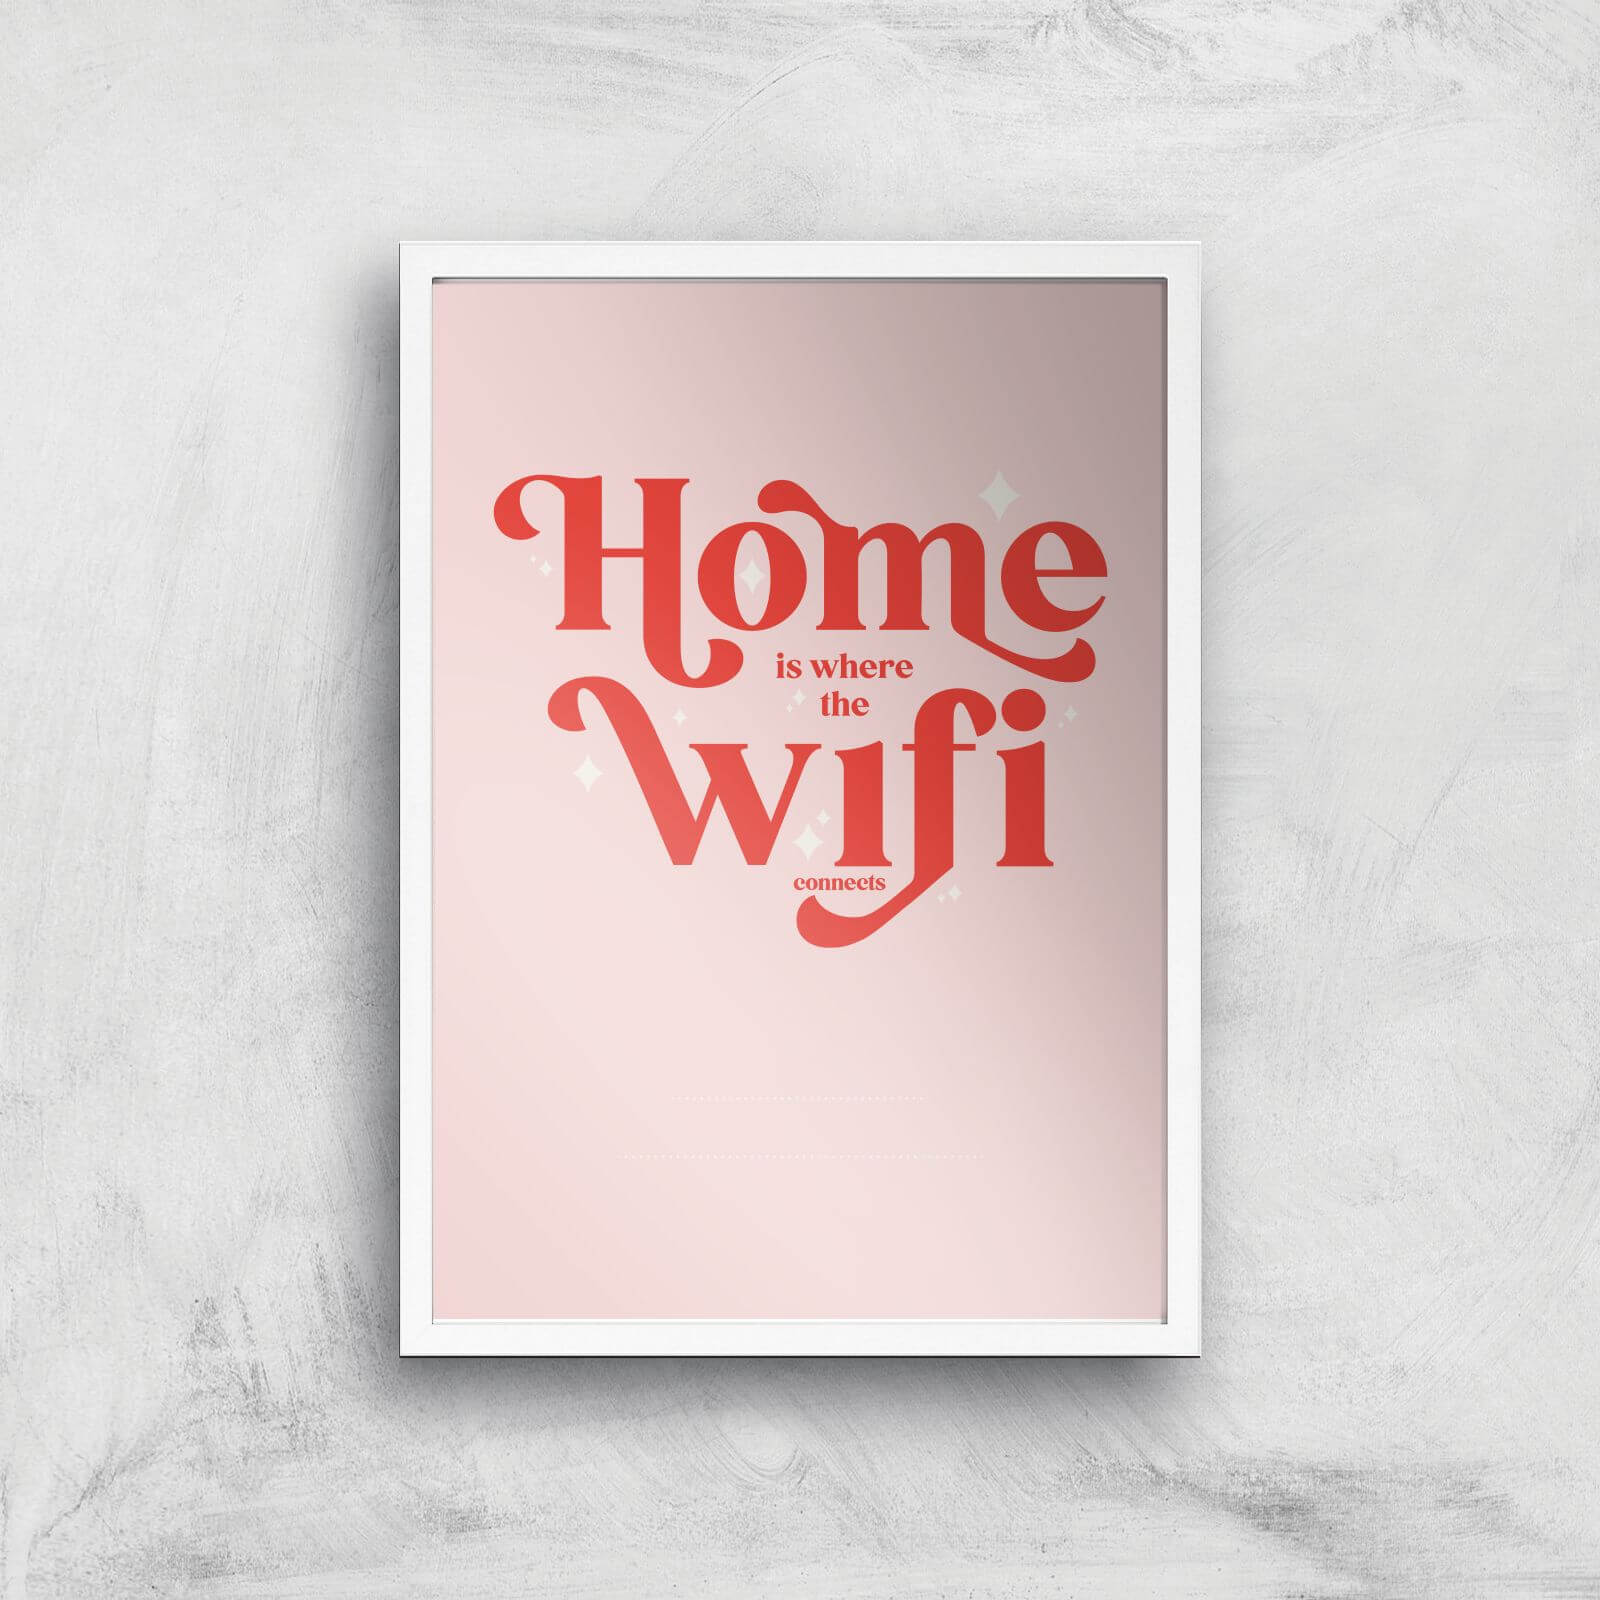 Hermione Chantal Light Home Is Where The Wifi Is Giclee Art Print - A3 - White Frame